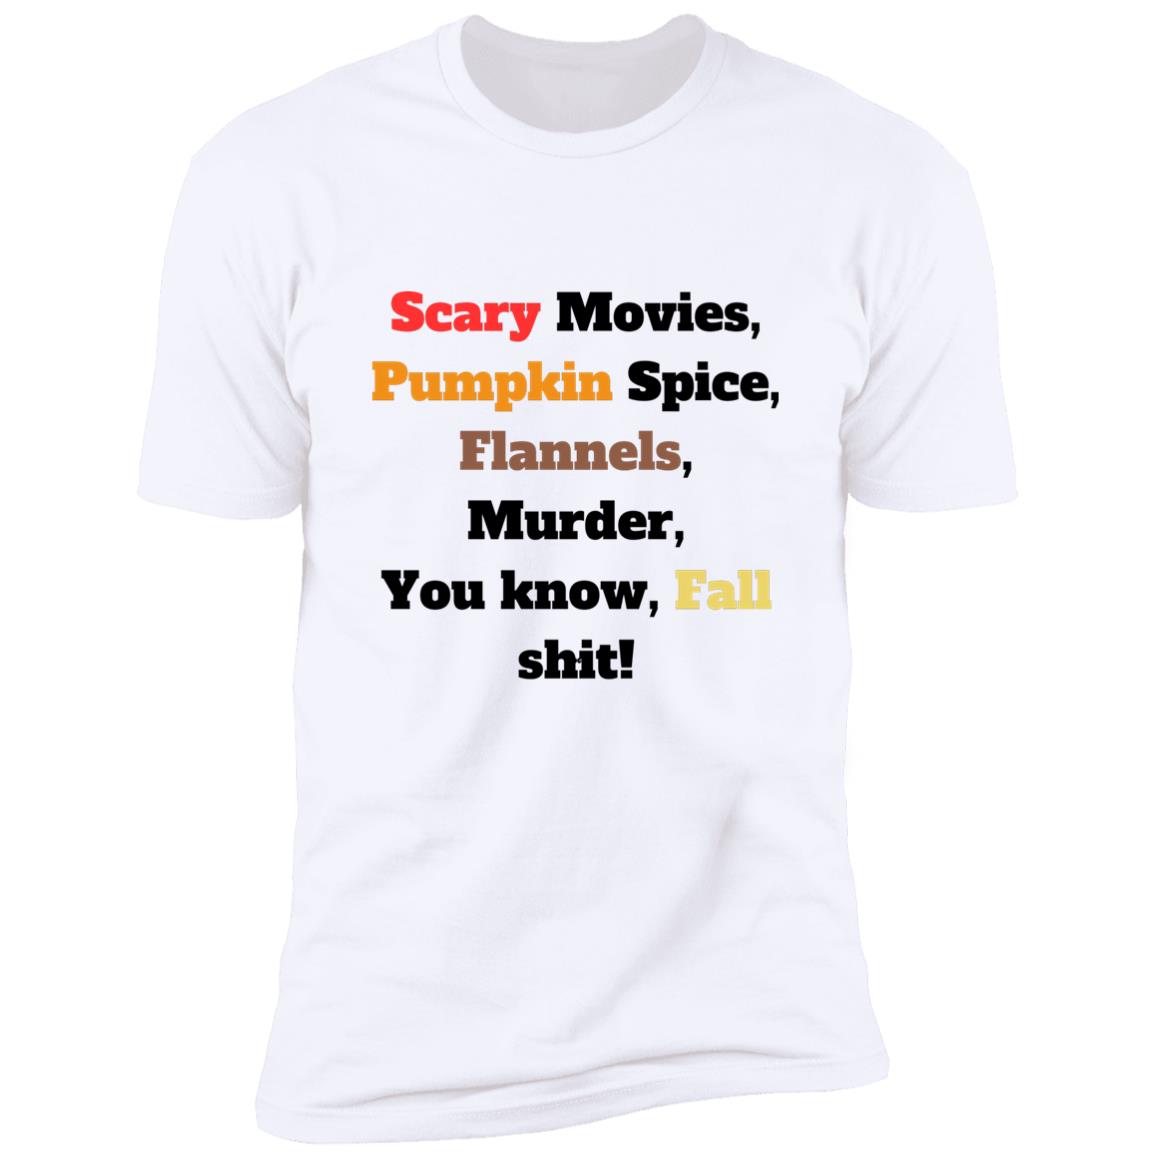 Get trendy with Fall Shit - T-Shirts available at Good Gift Company. Grab yours for $12 today!